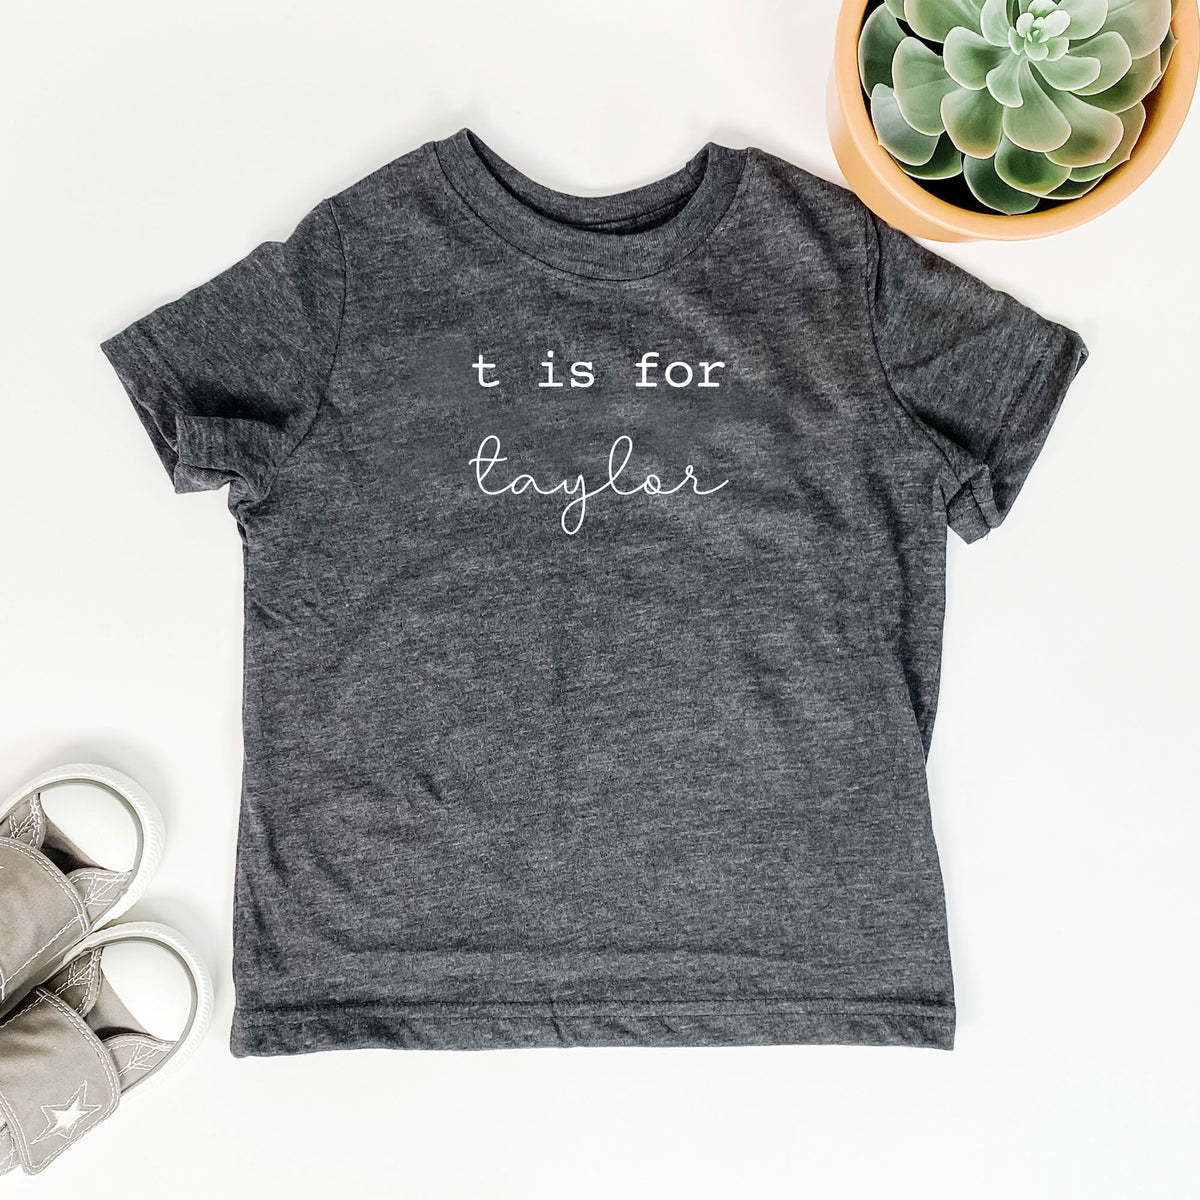 N is for Name TEE